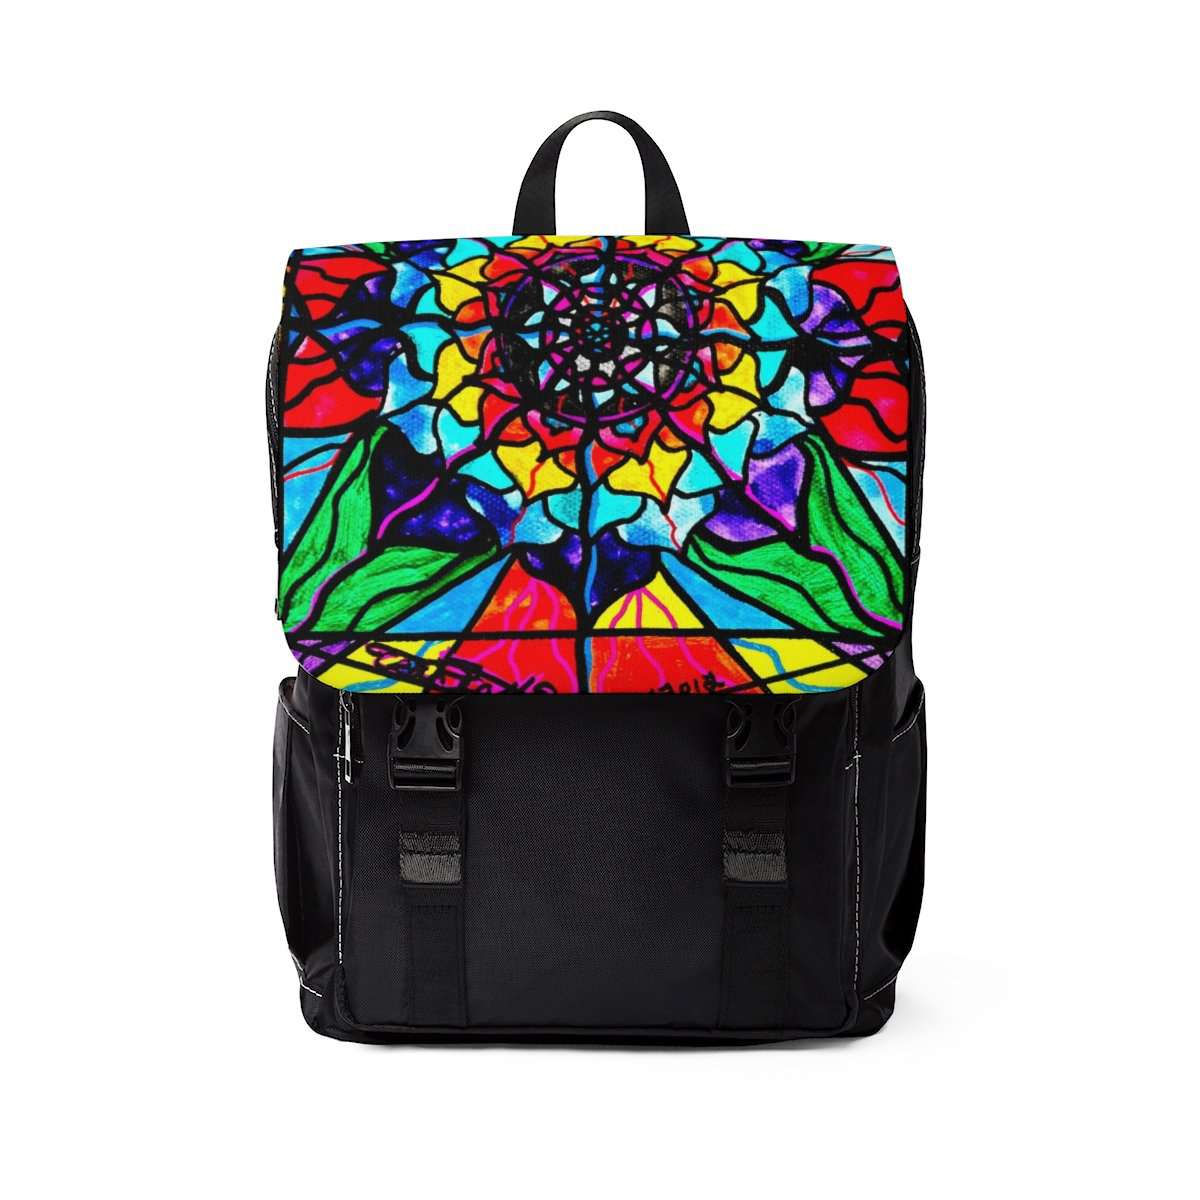 get-the-latest-in-sports-personal-expansion-unisex-casual-shoulder-backpack-online_0.jpg